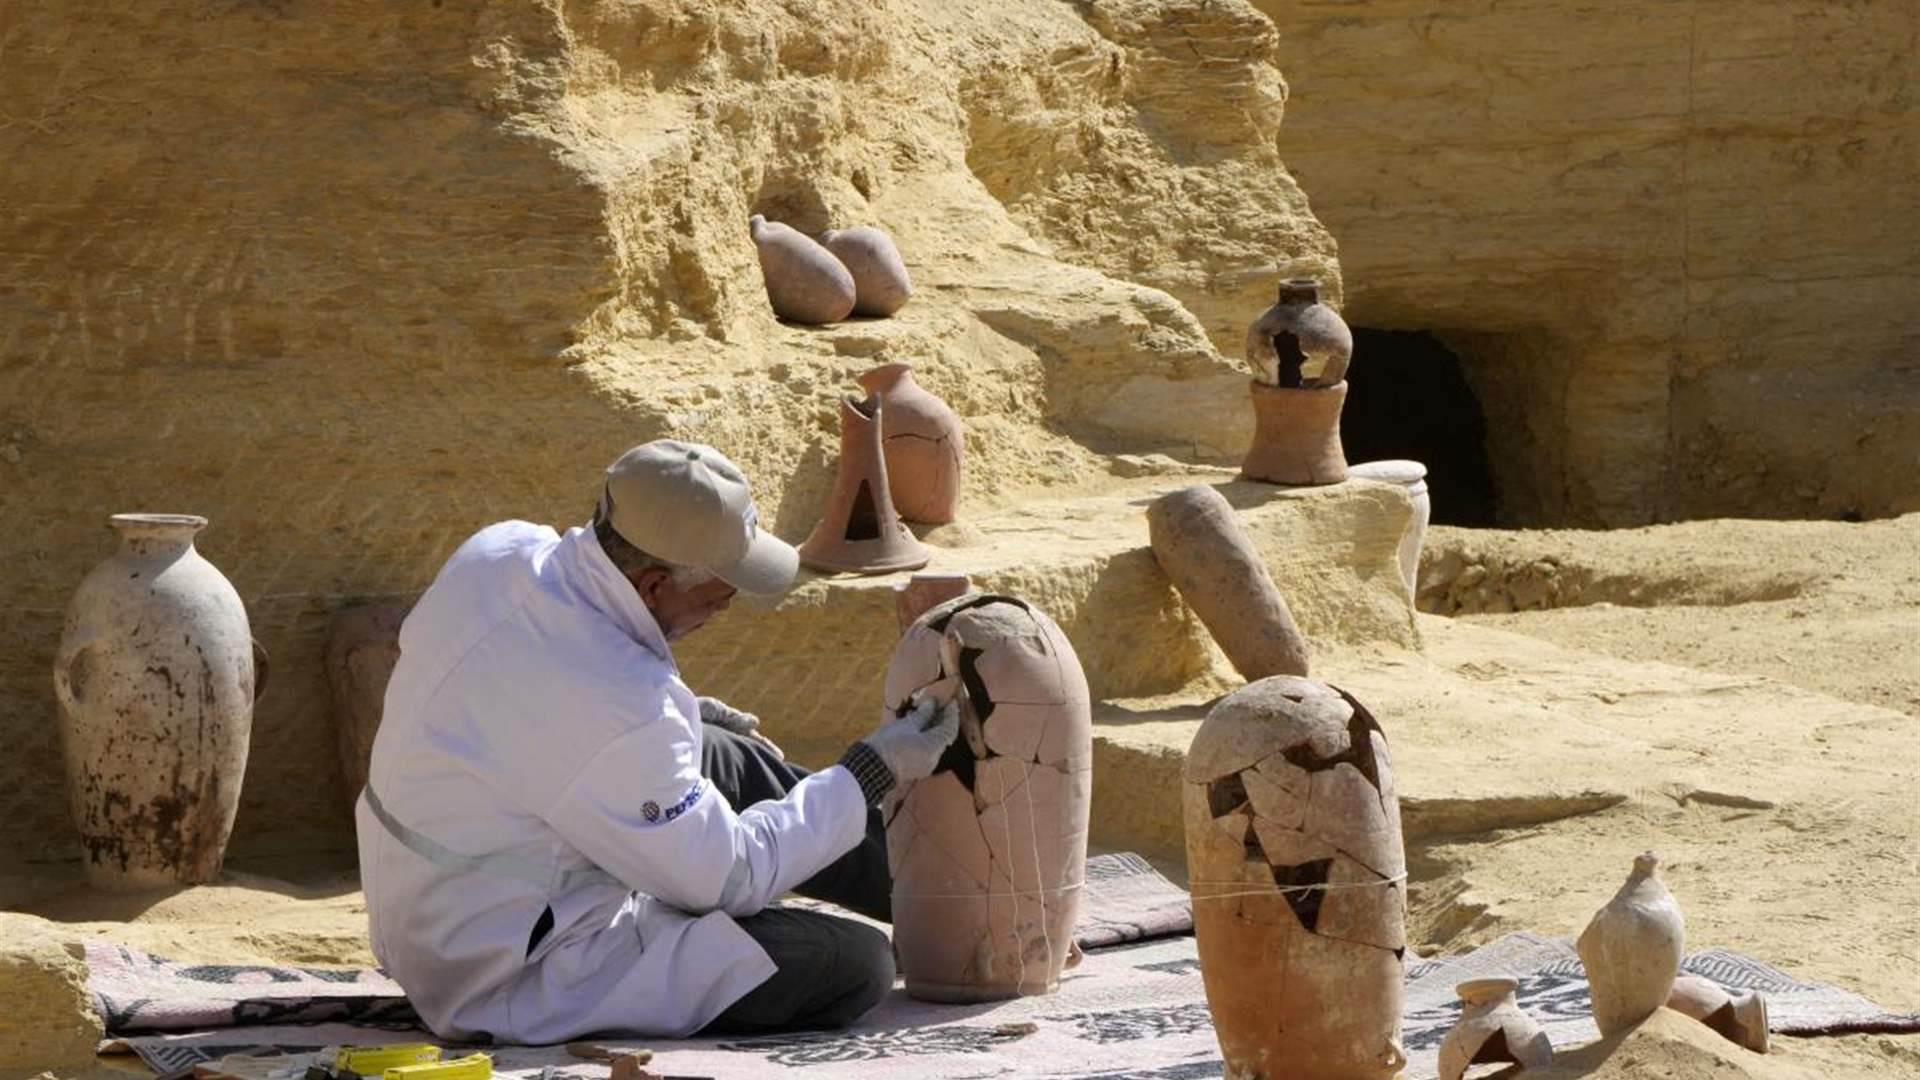 Egypt unveils tombs and sarcophagus in new excavation